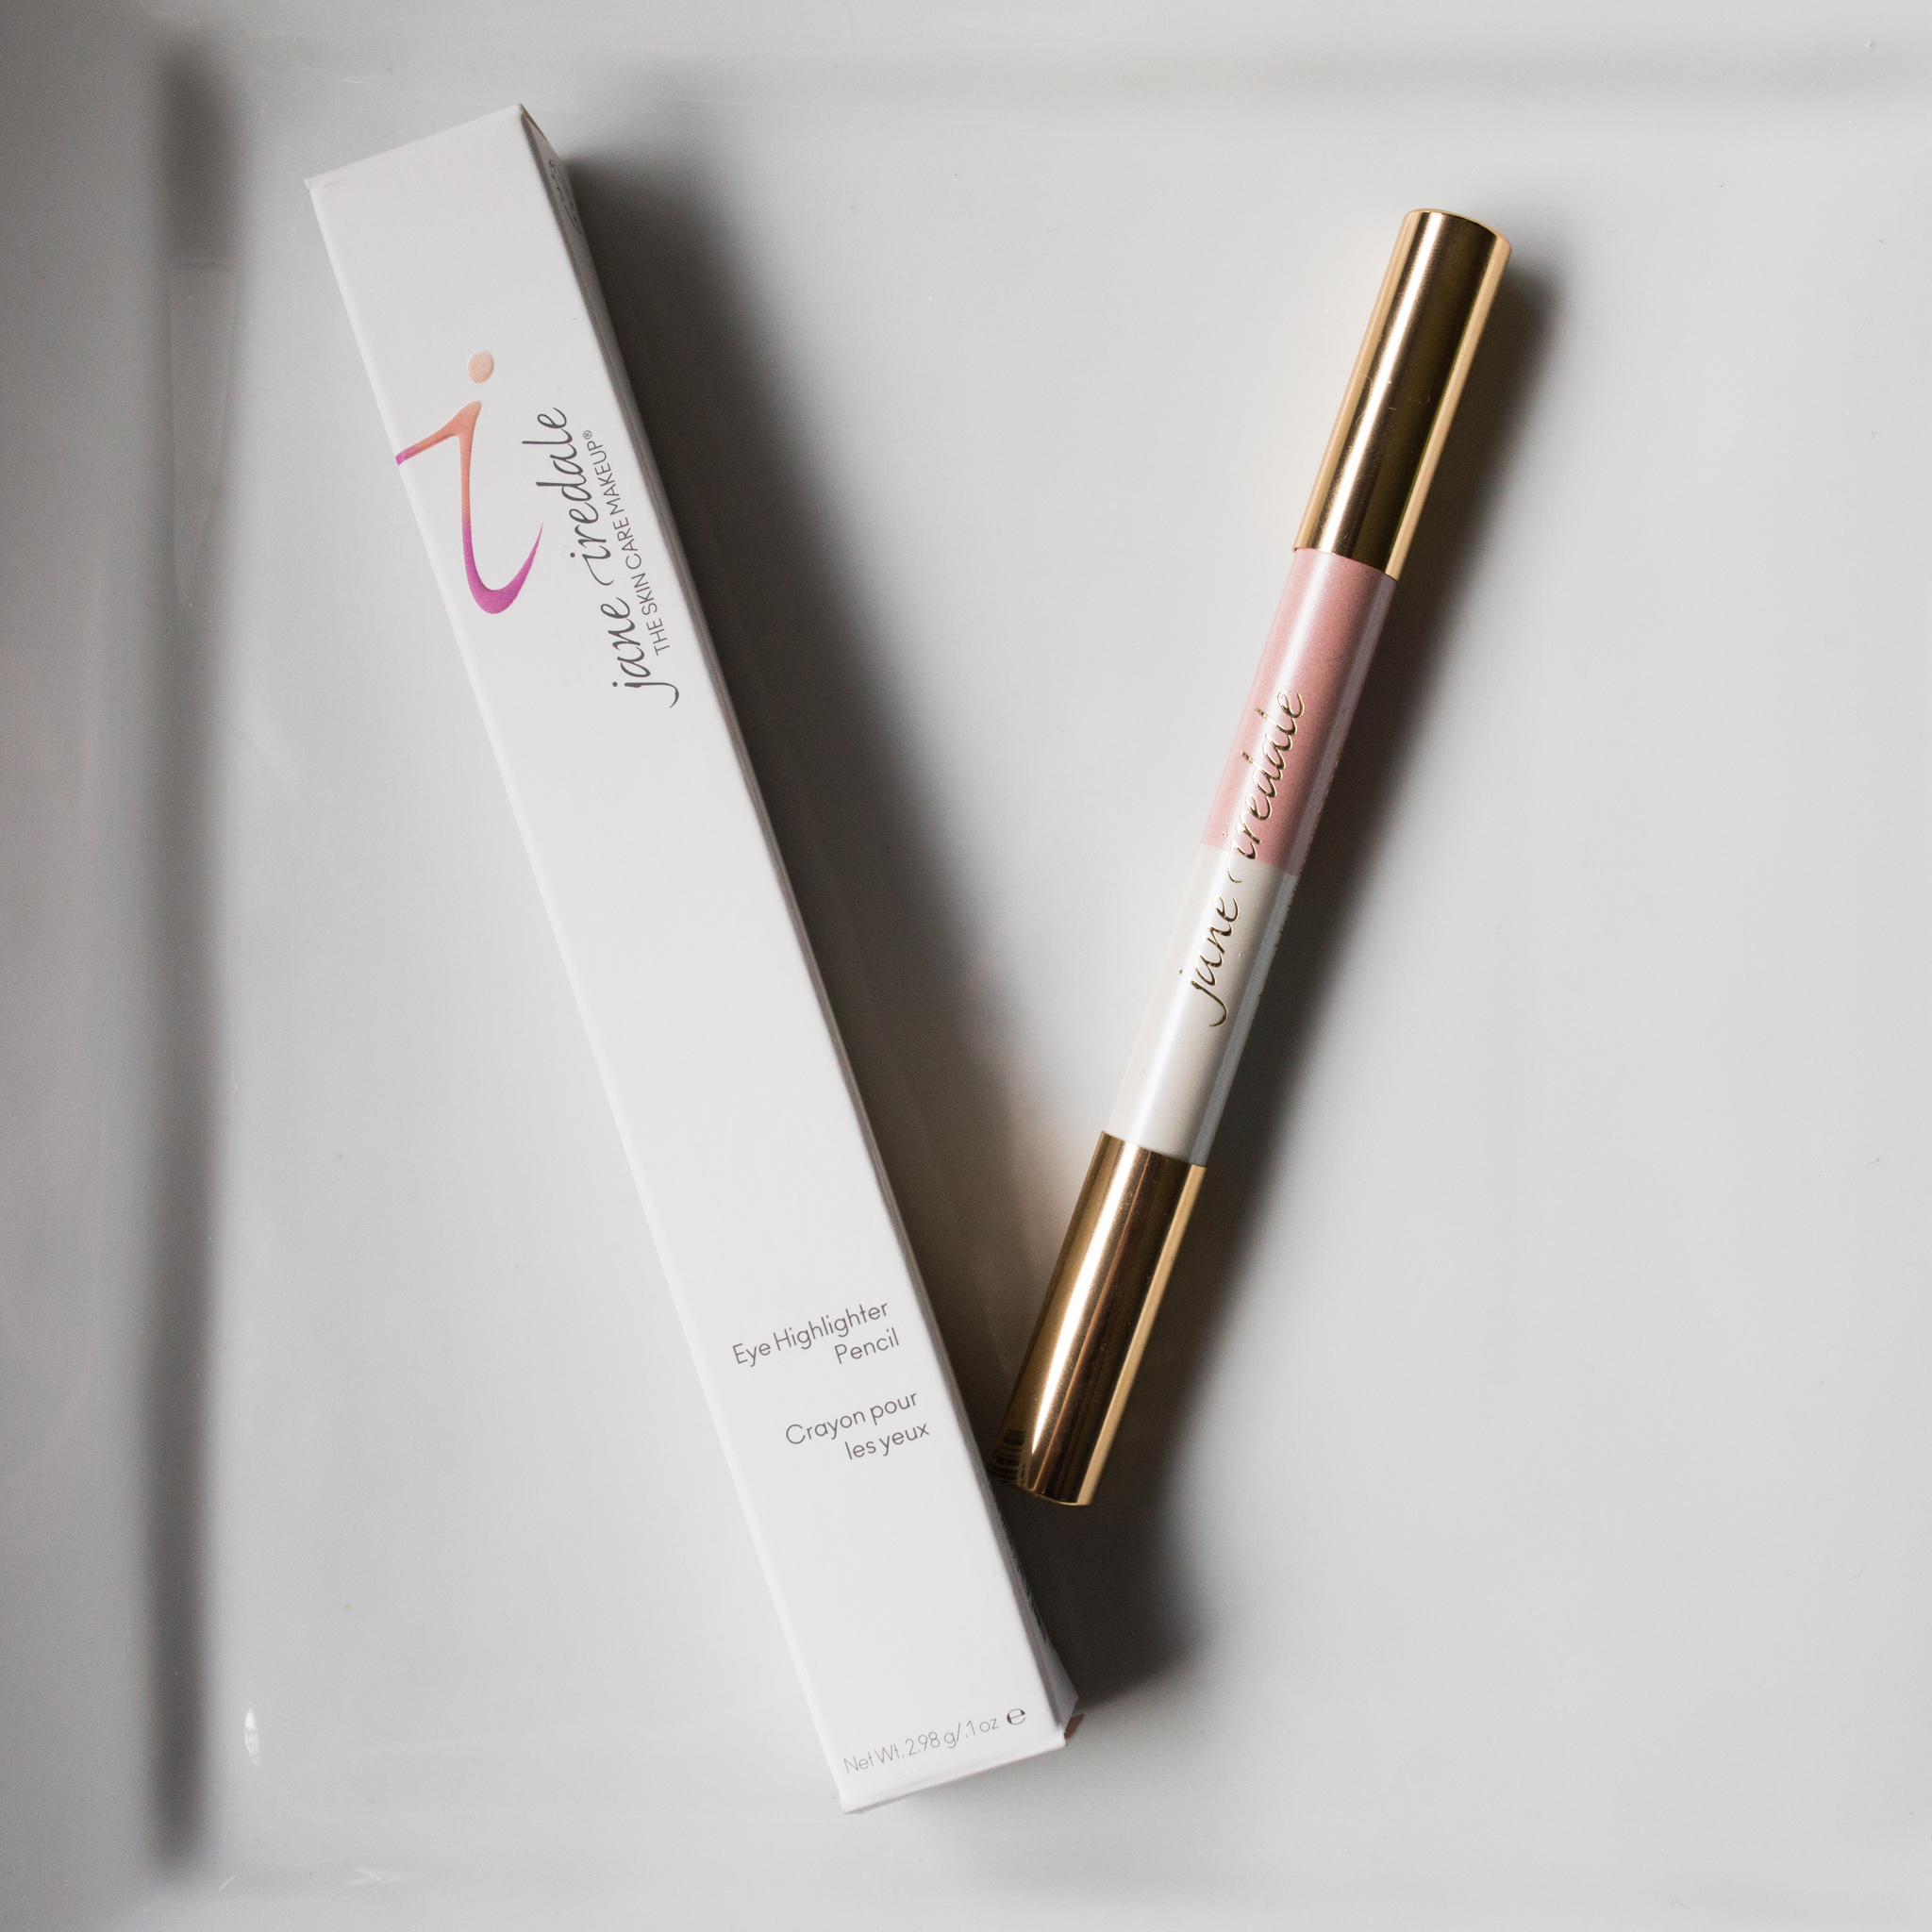 Jane Iredale White/Pink Highlighter Makeup Culture